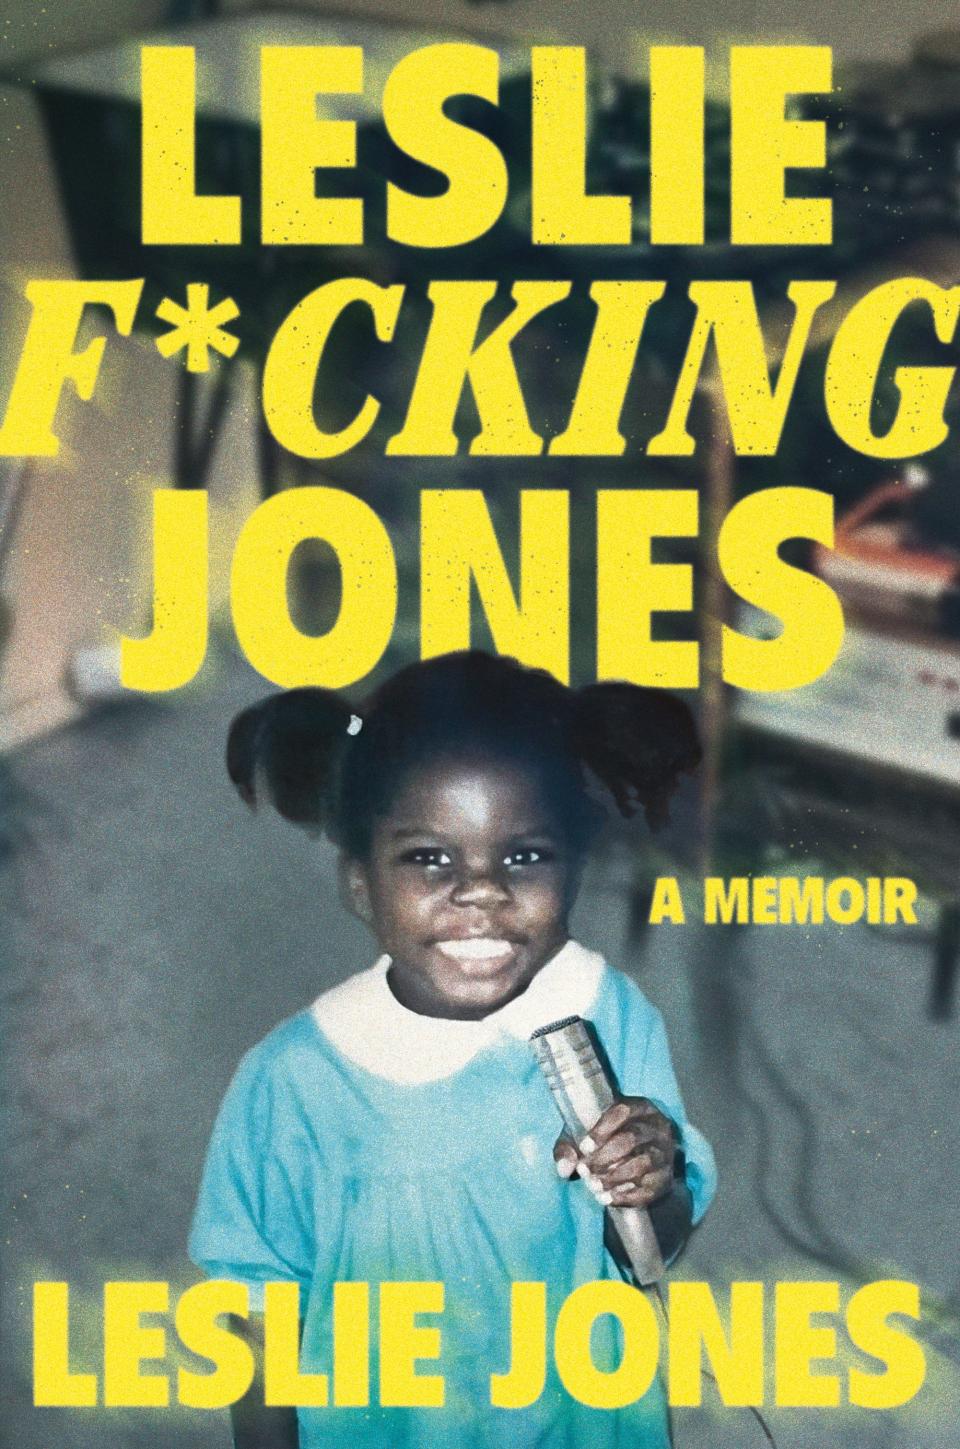 Actress and comedian Leslie Jones chronicles her life and career in a new memoir.